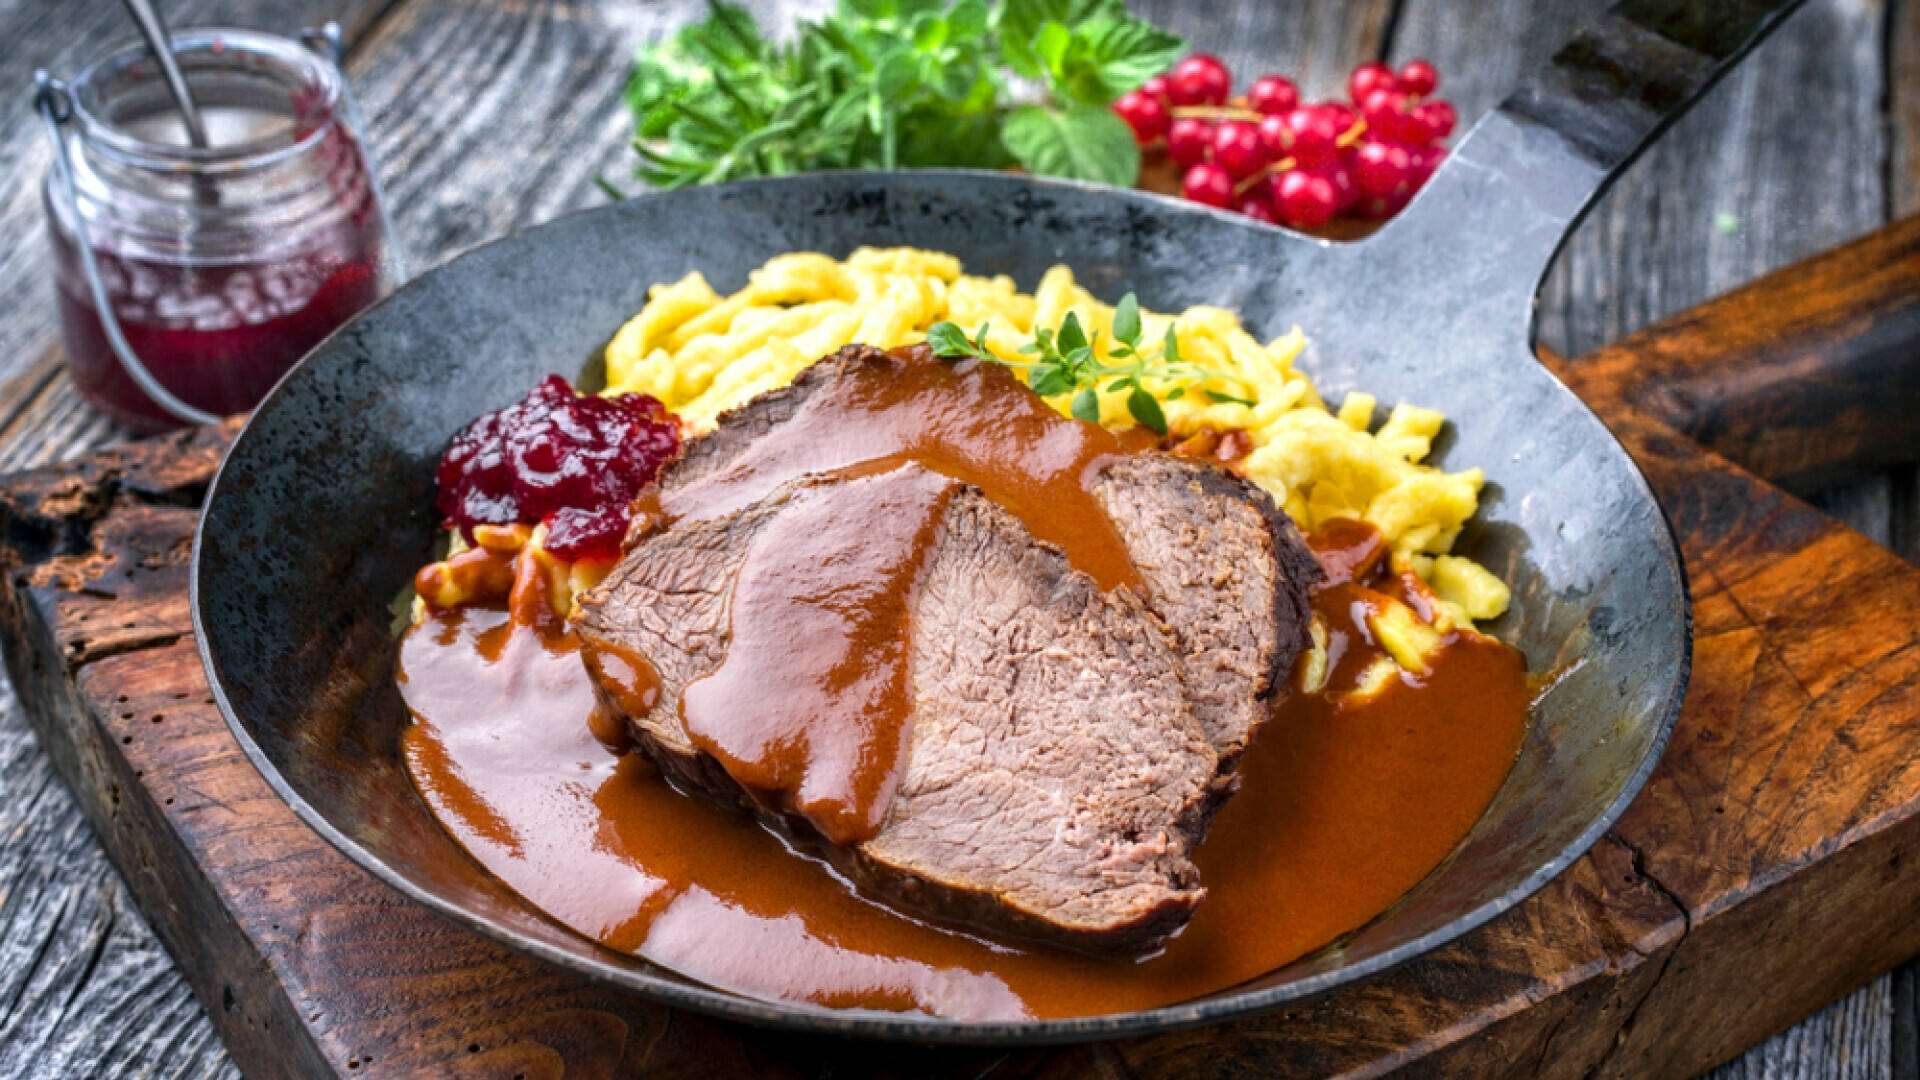 Caption: Authentic German Sauerbraten Dish with Redcurrant Jam and Basil Wallpaper